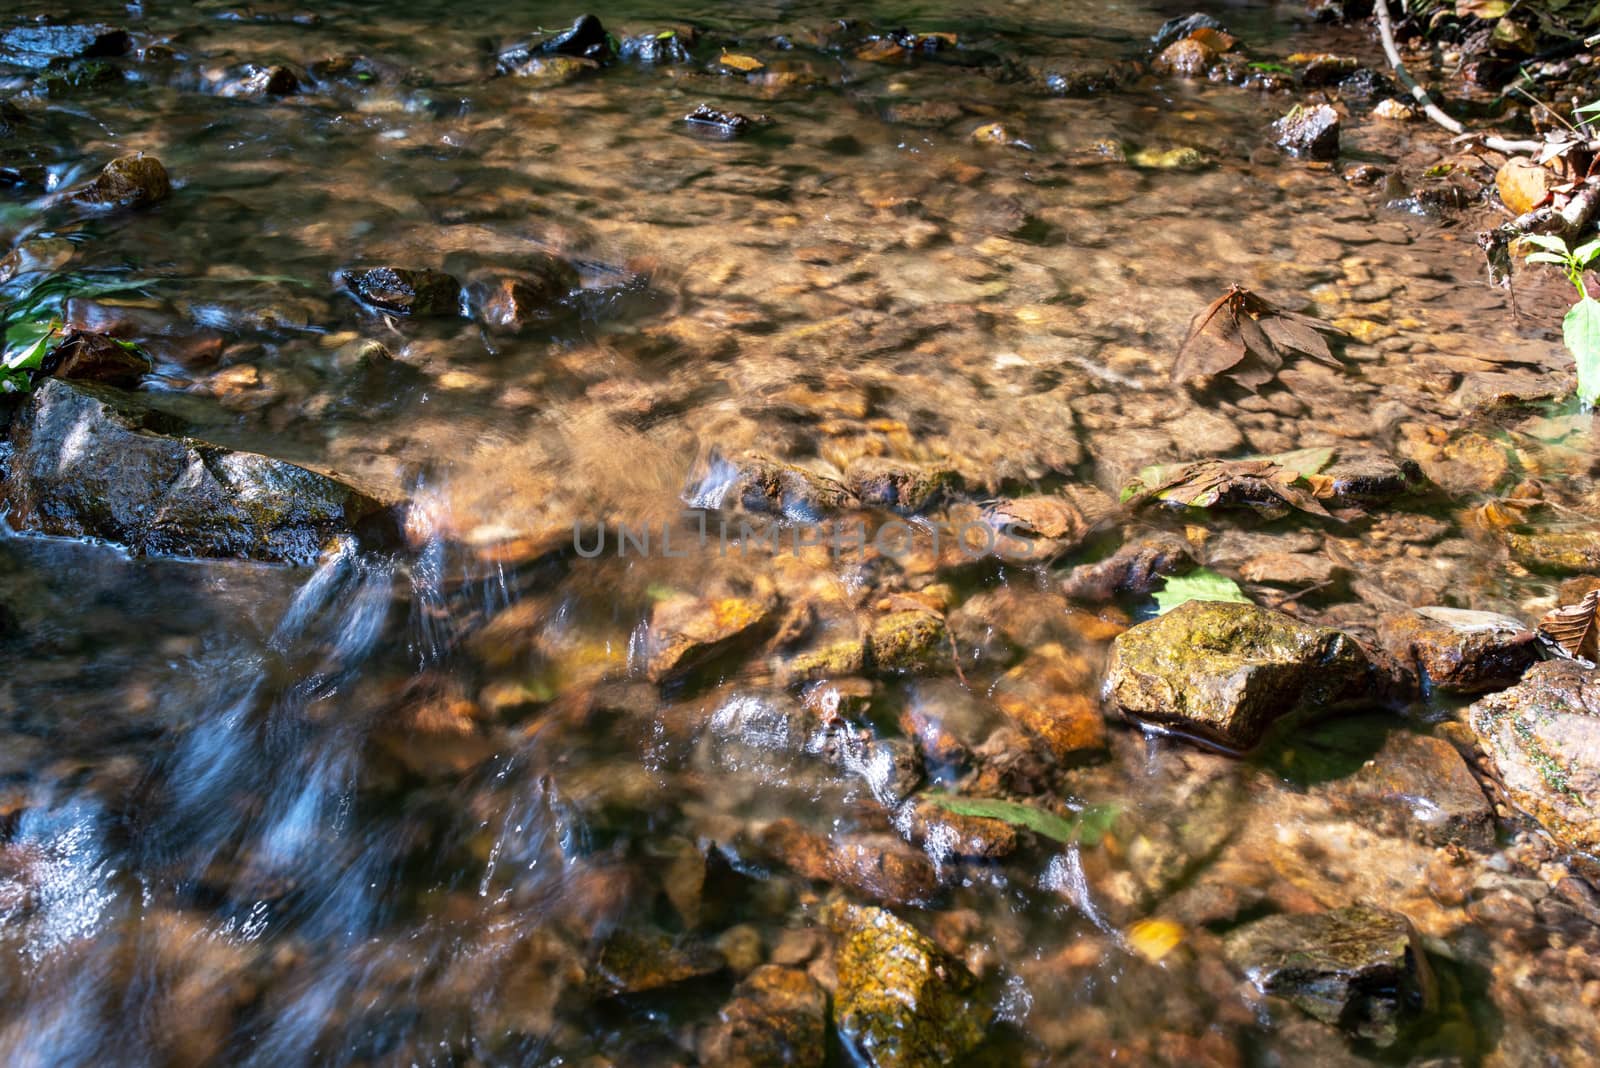 Long exposure surreal abstract view of a flowing woodland stream with colorful stones and reflected blue sky. Full frame tranquil nature image in natural light with copy space.